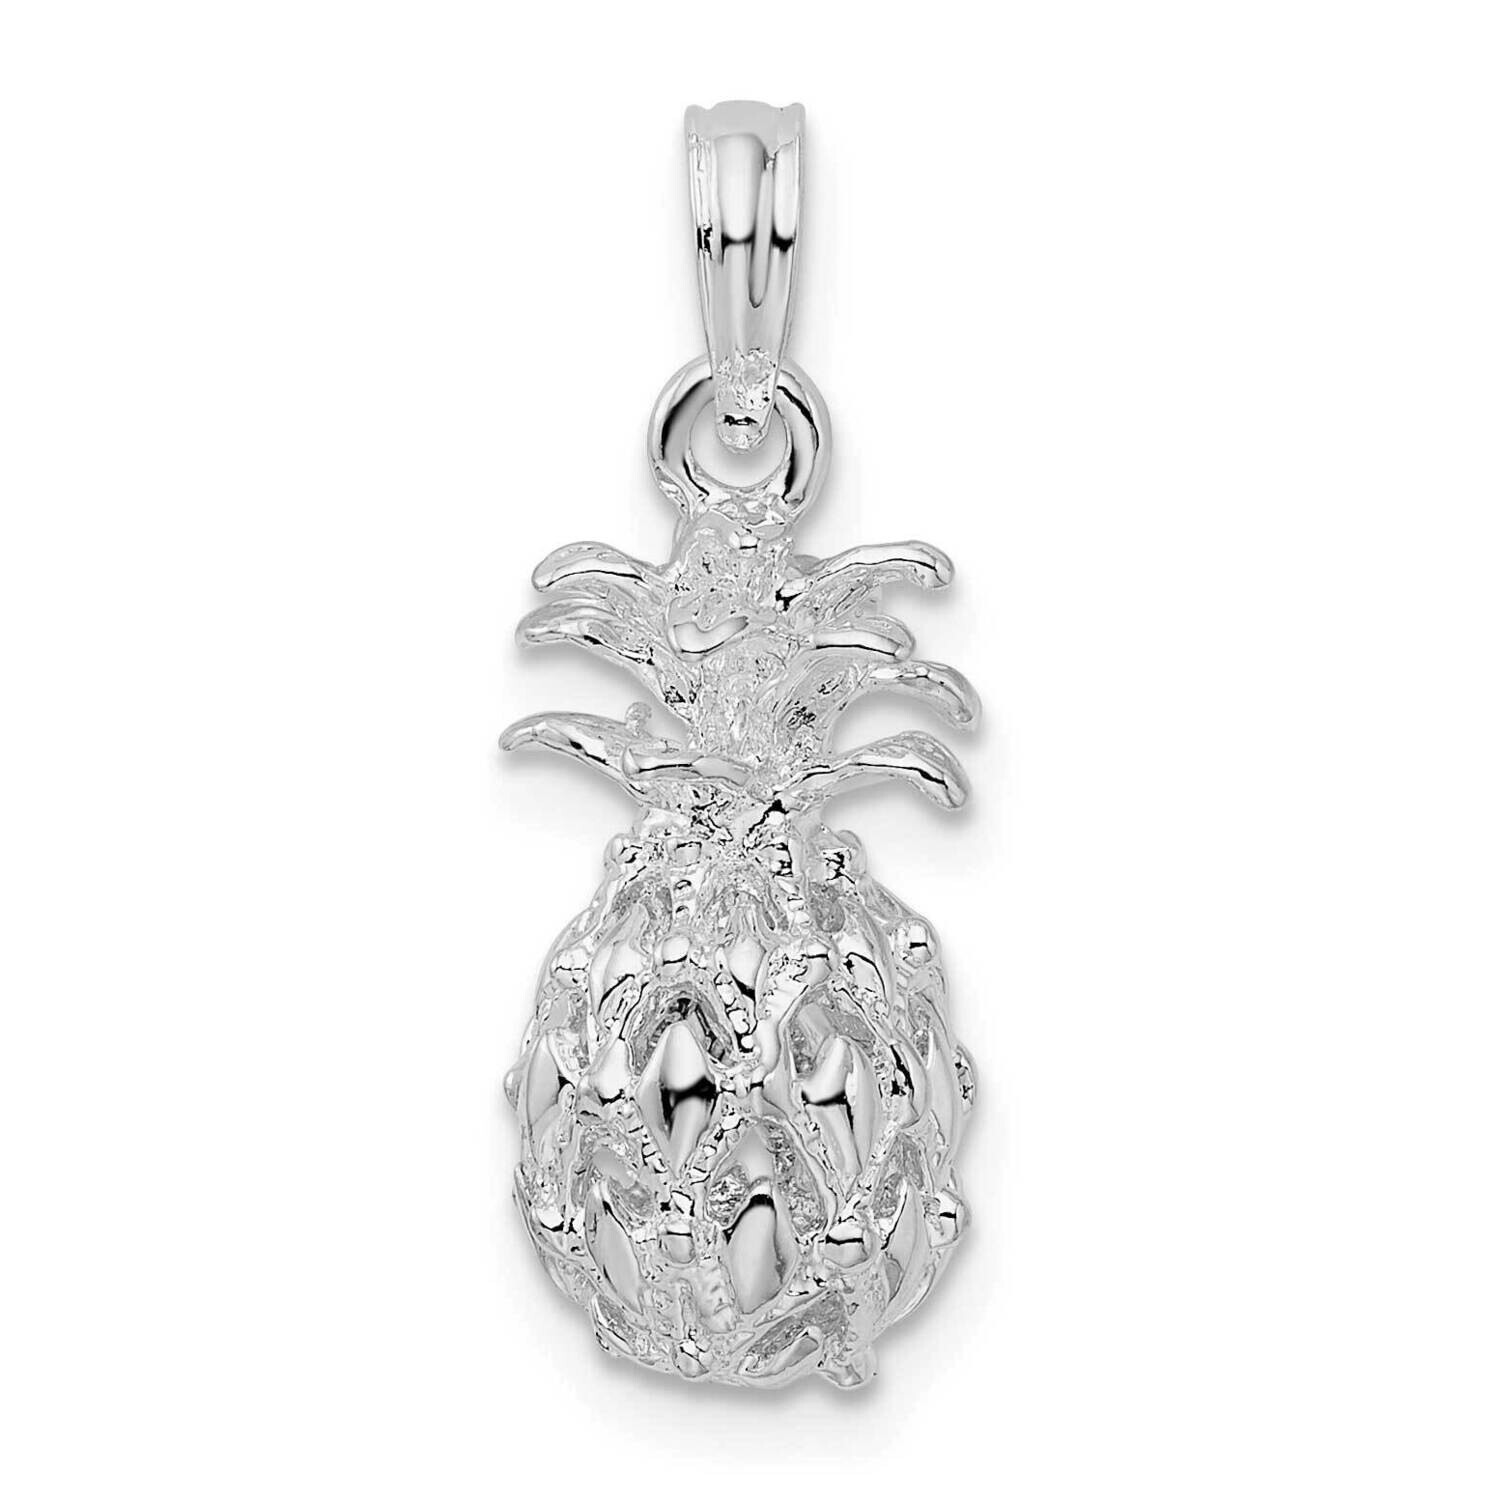 3D Cut-Out Small Pineapple Pendant Sterling Silver Polished QC9941